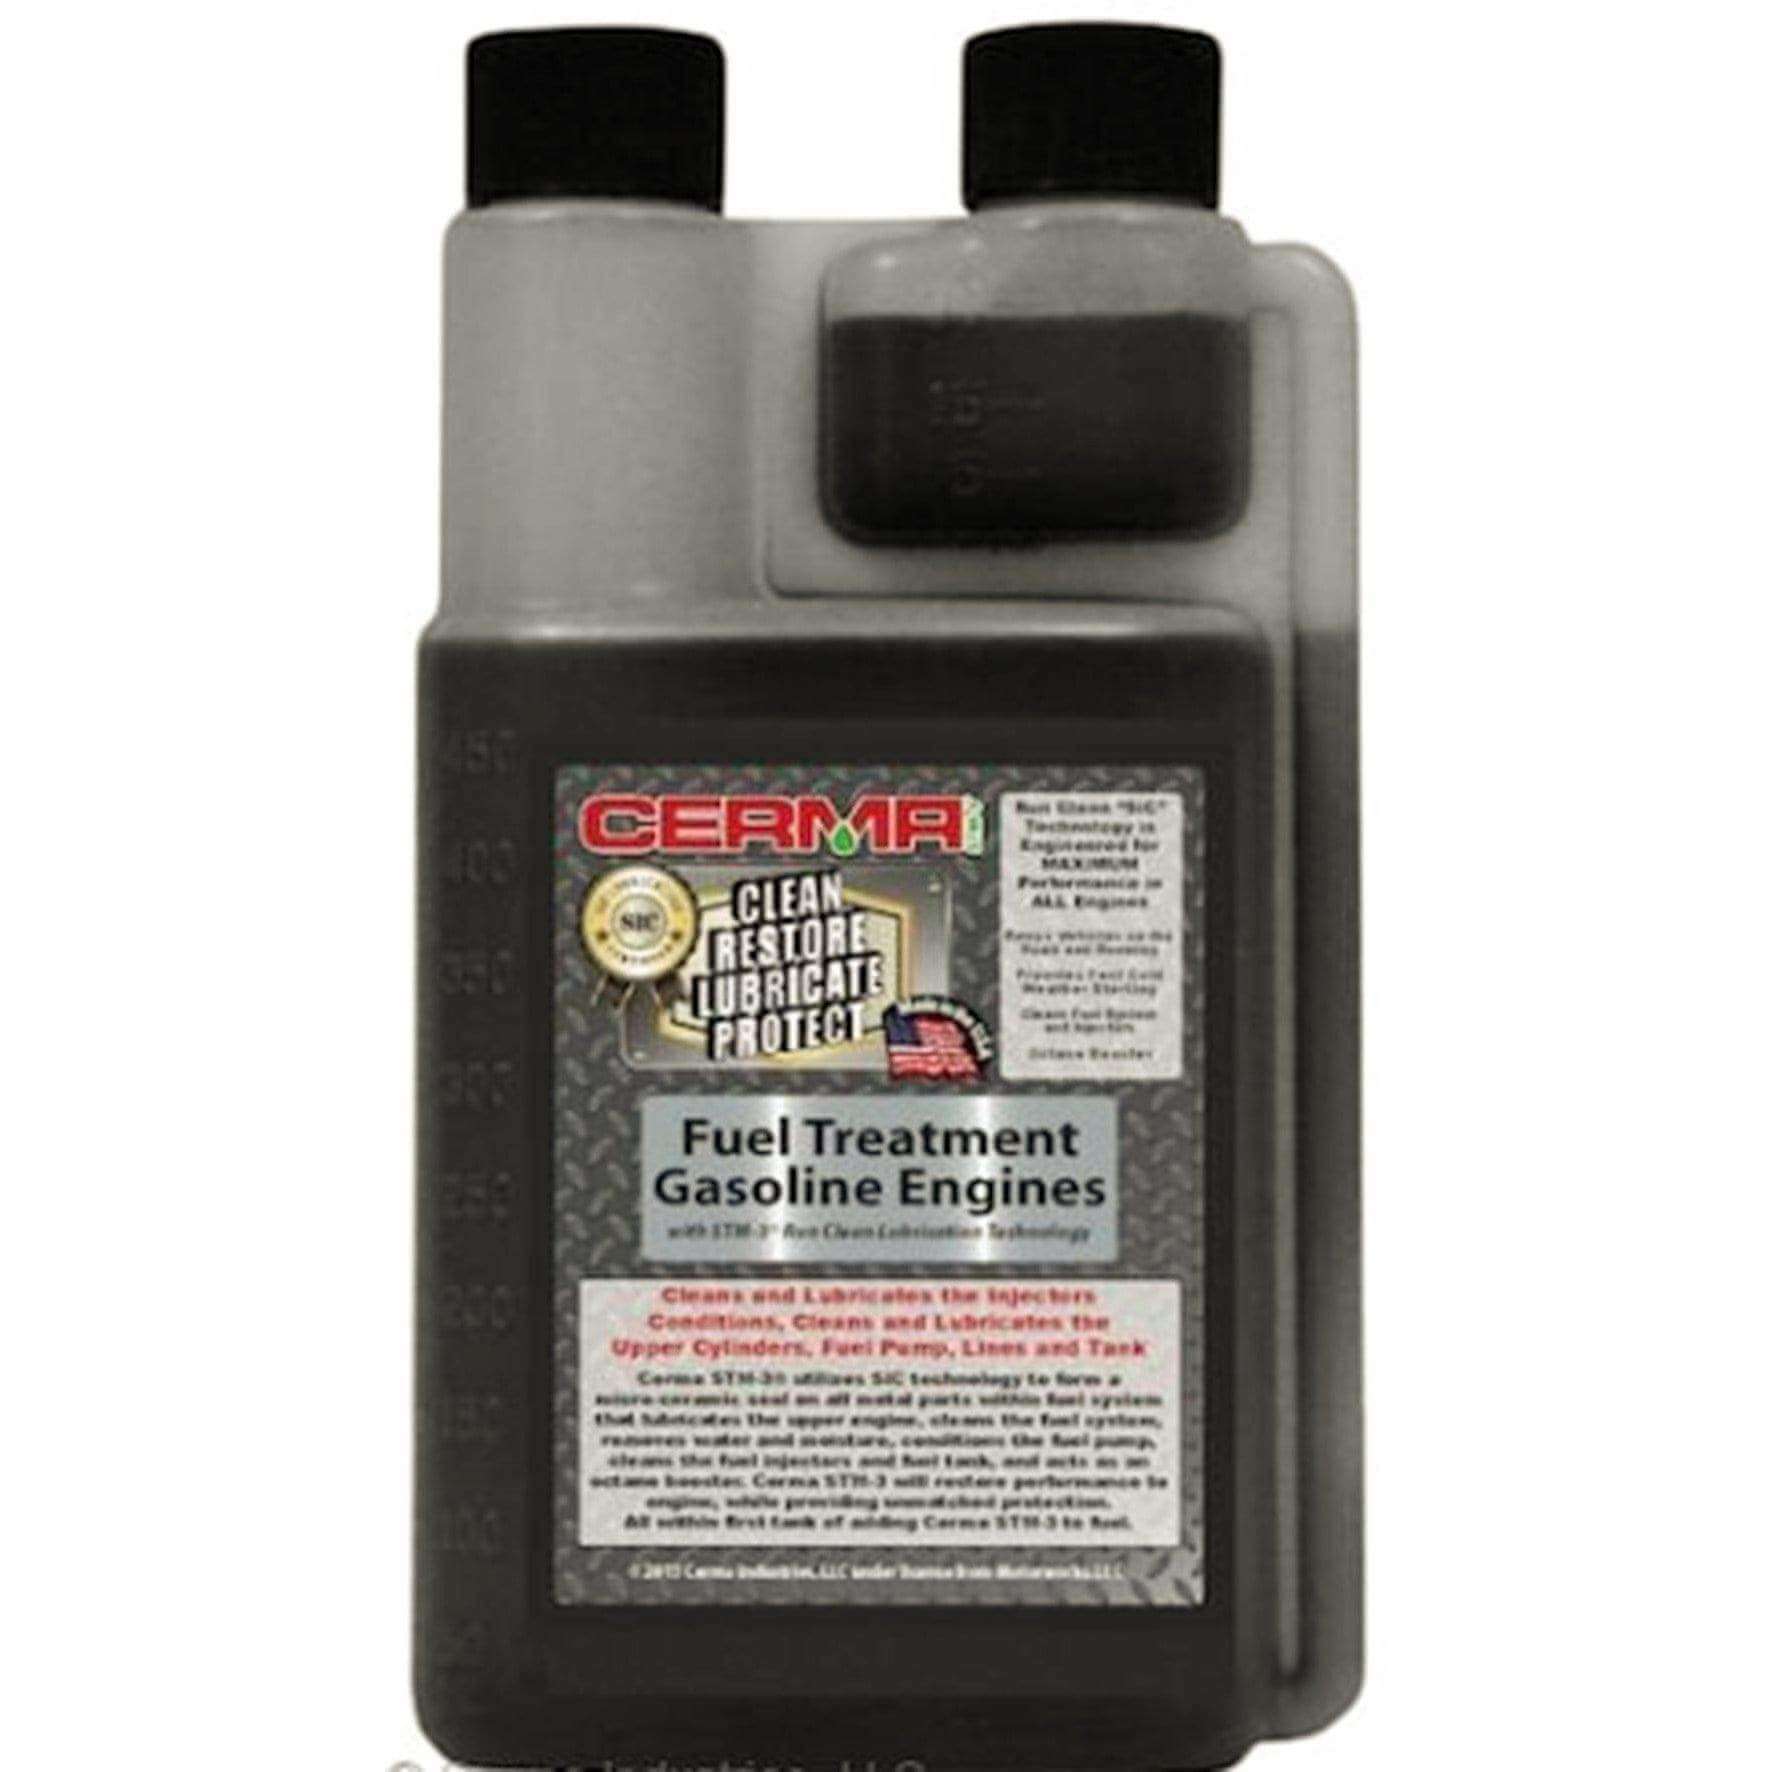 Cerma Ceramic Fuel Treatment for Gasoline Engines at $70.44 only from cermatreatment.com